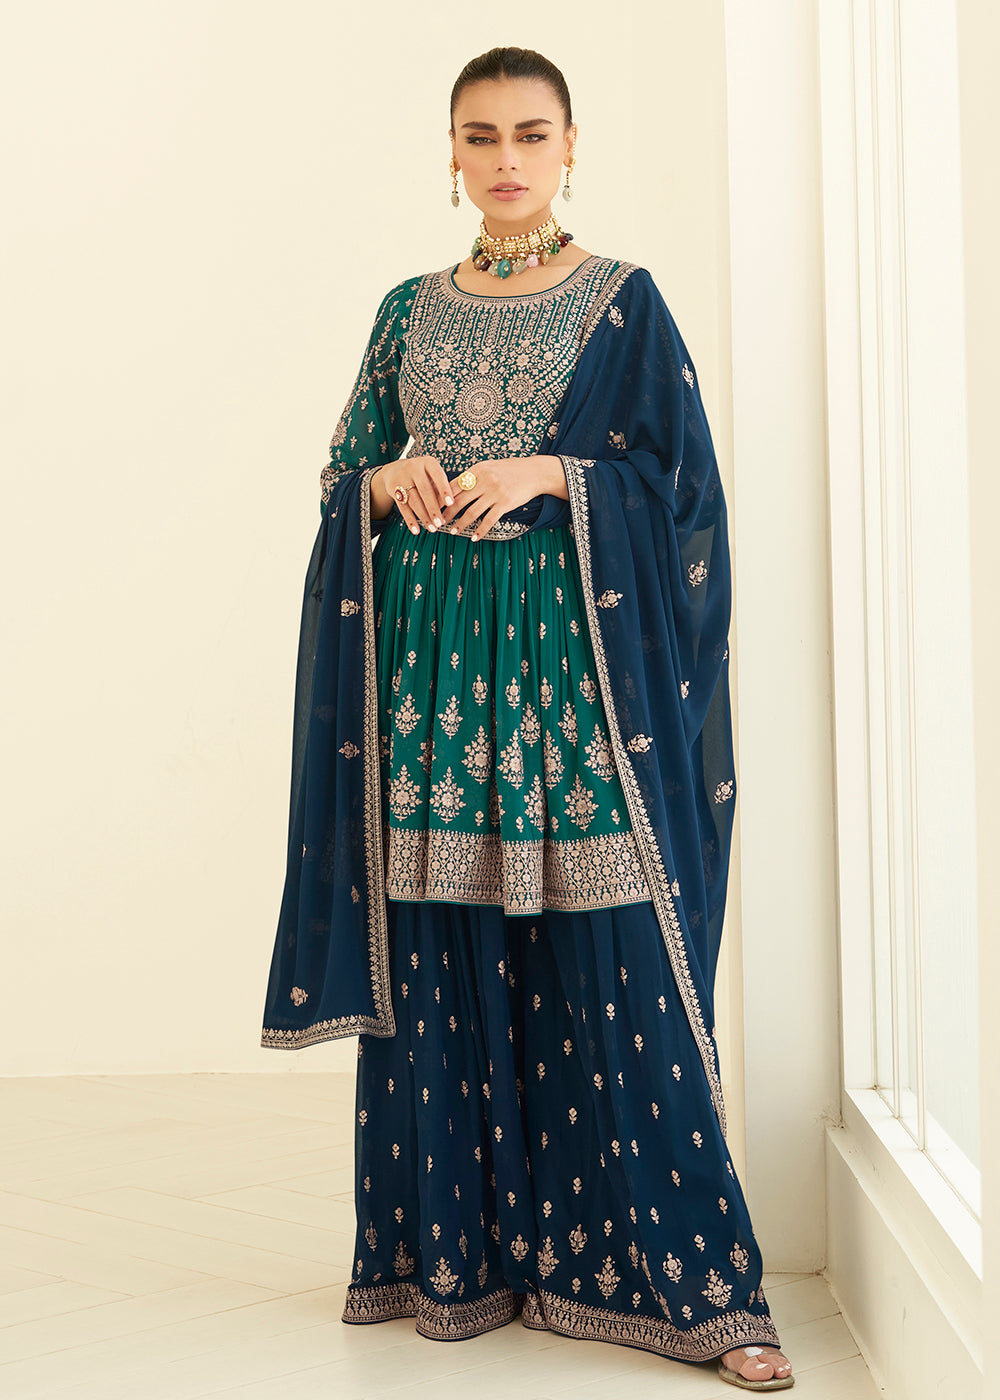 Buy Now Gorgeous Georgette Teal & Navy Blue Wedding Palazzo Suit Online in USA, UK, Canada, Germany, Australia & Worldwide at Empress Clothing